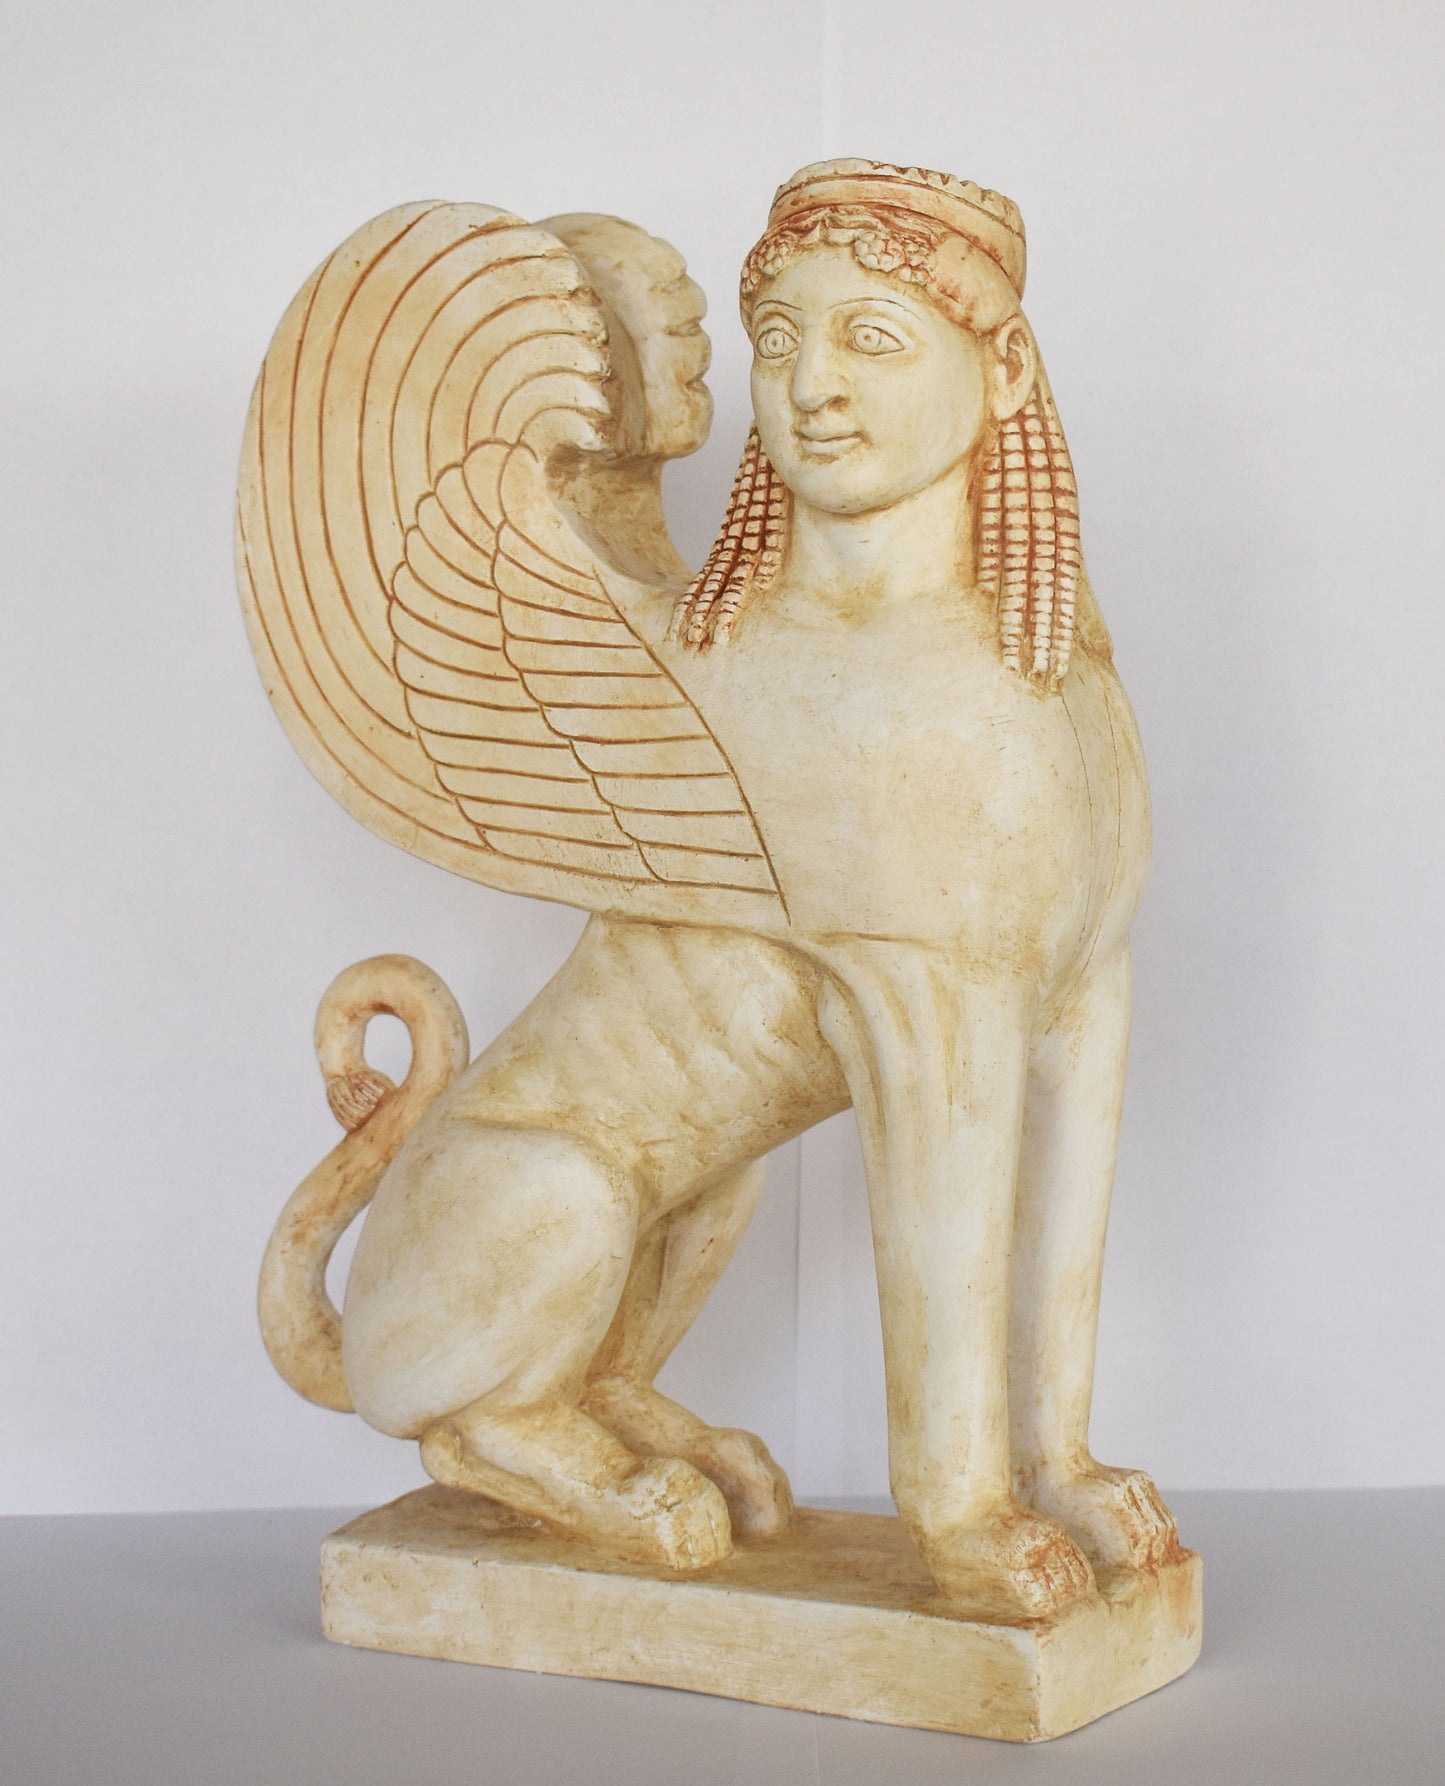 Sphinx - Guardian of Sacred Places, Symbol of Mystery - Composition of the Mortal and the Immortal - Riddle to Oedipus - Casting Stone